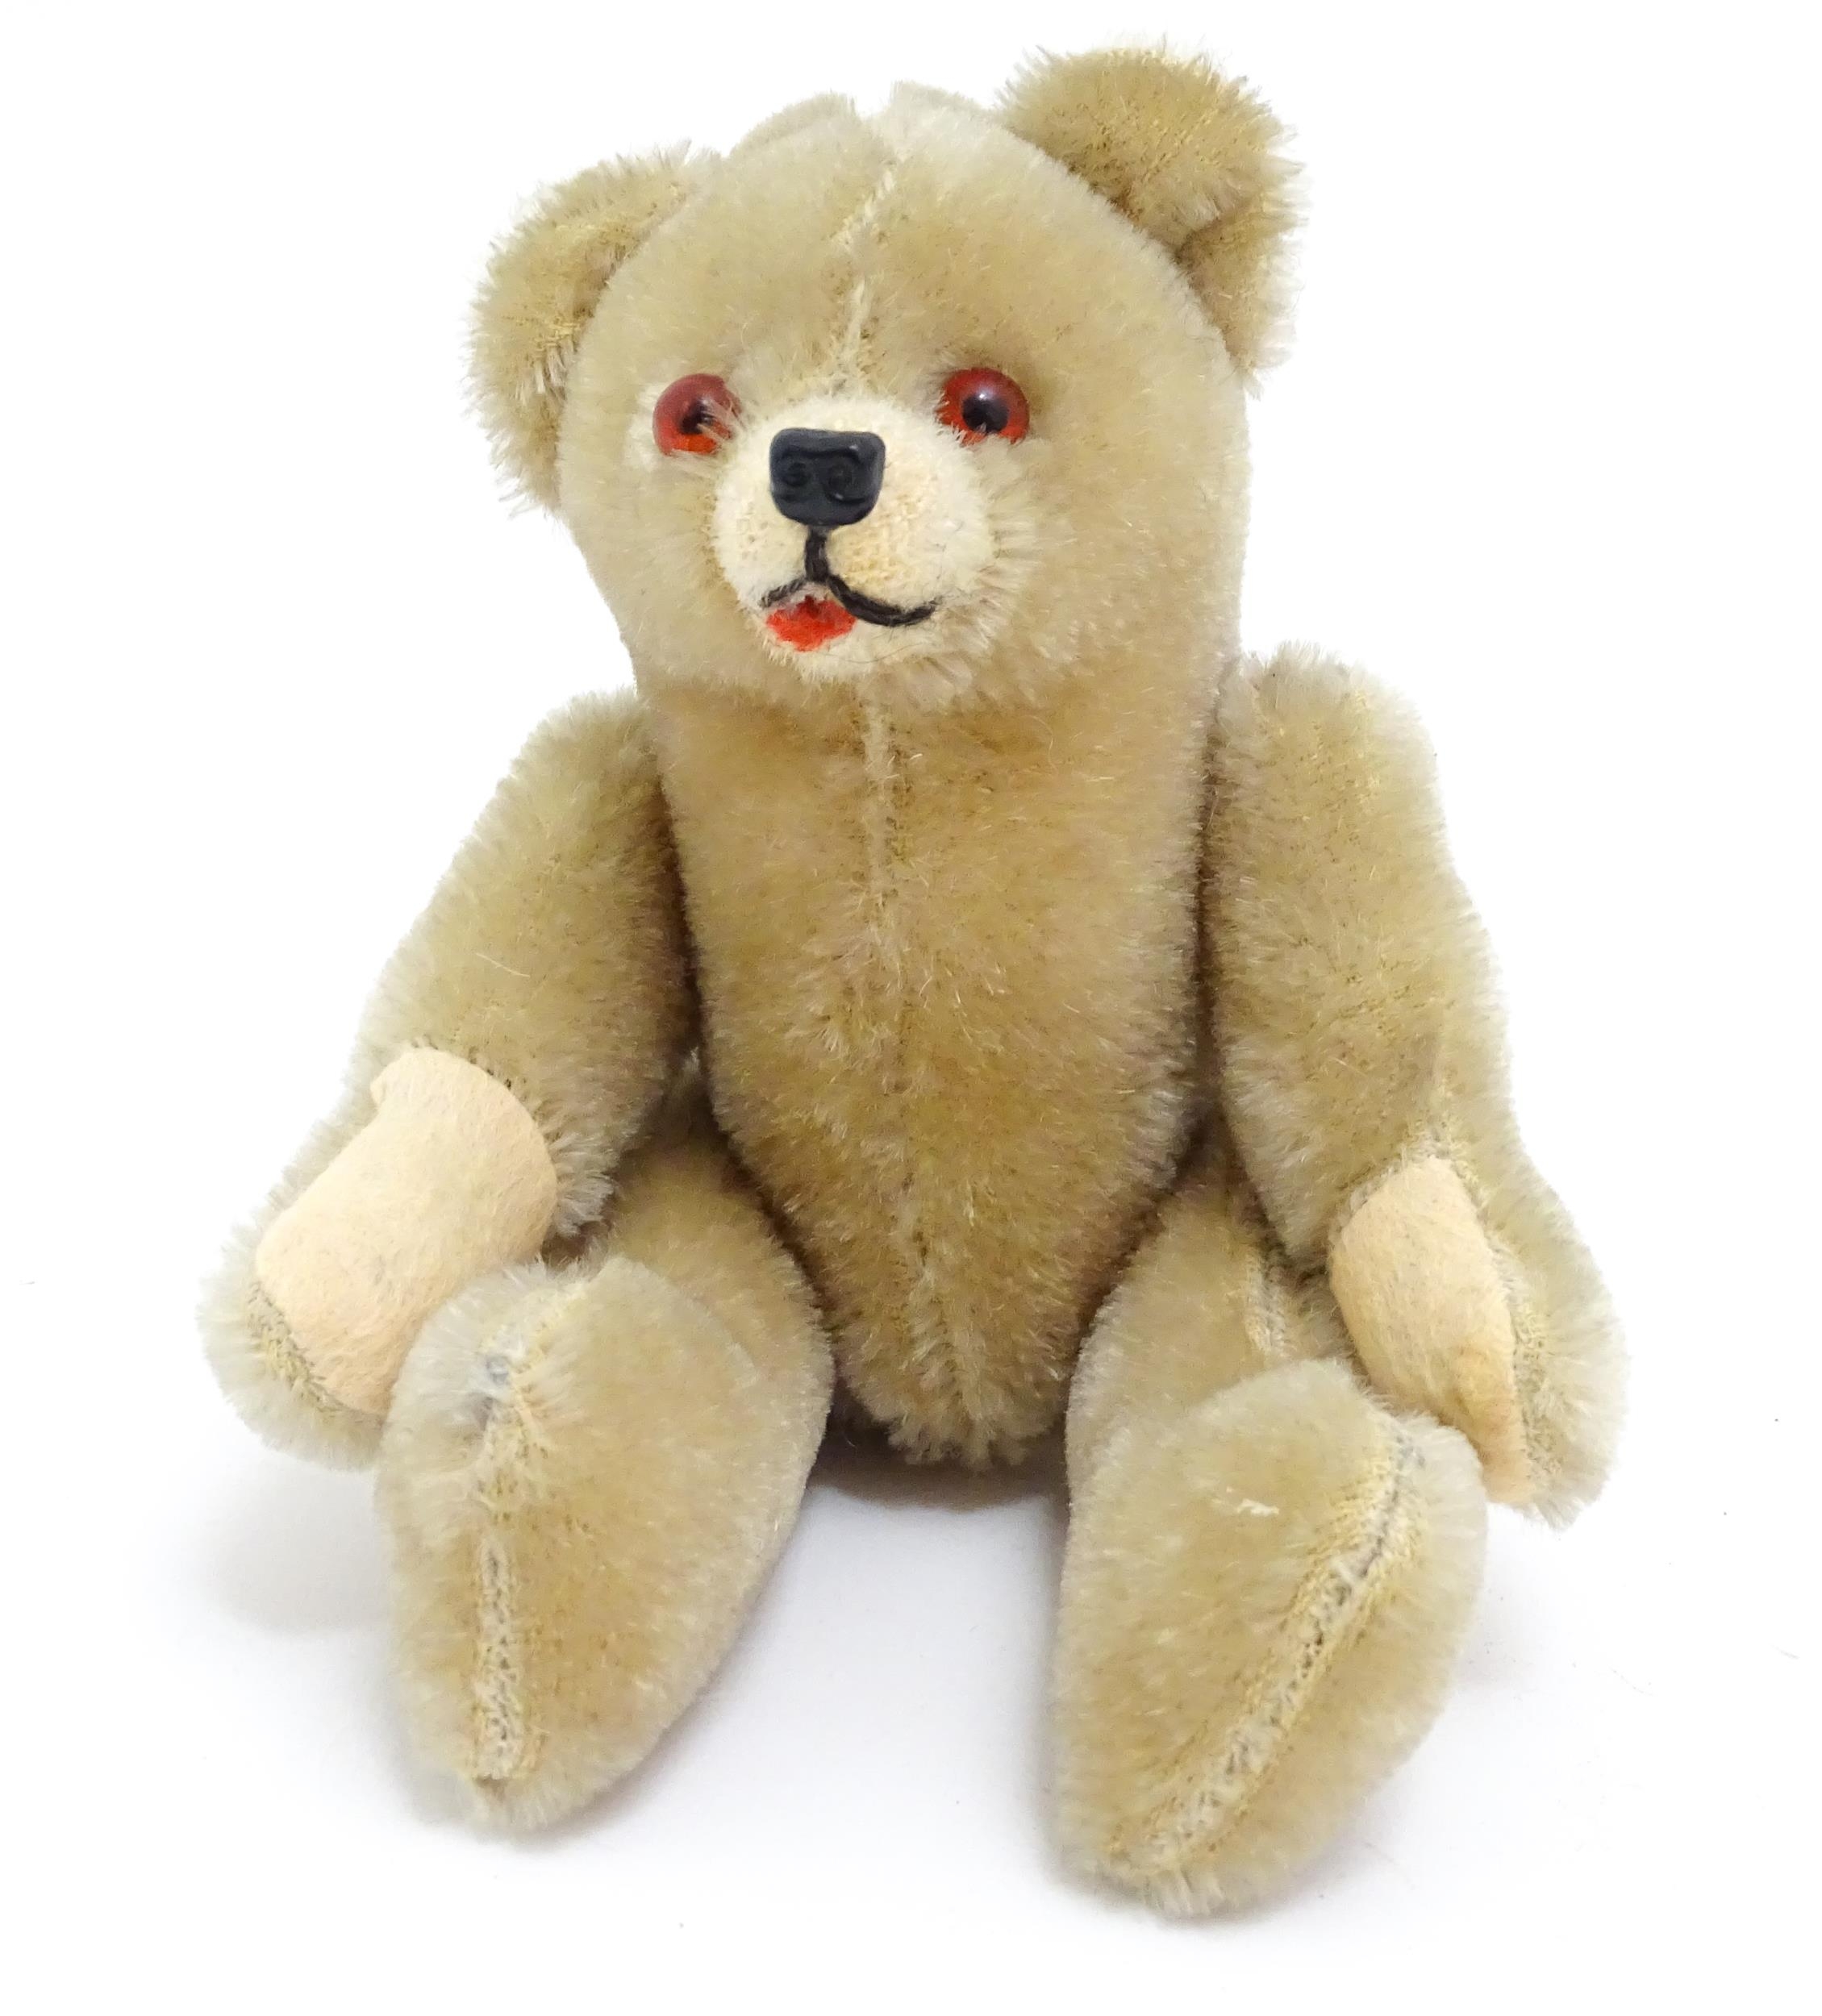 Toy: A small 20thC plush teddy bear with stitched mouth, fabric tongue, pad paws and articulated